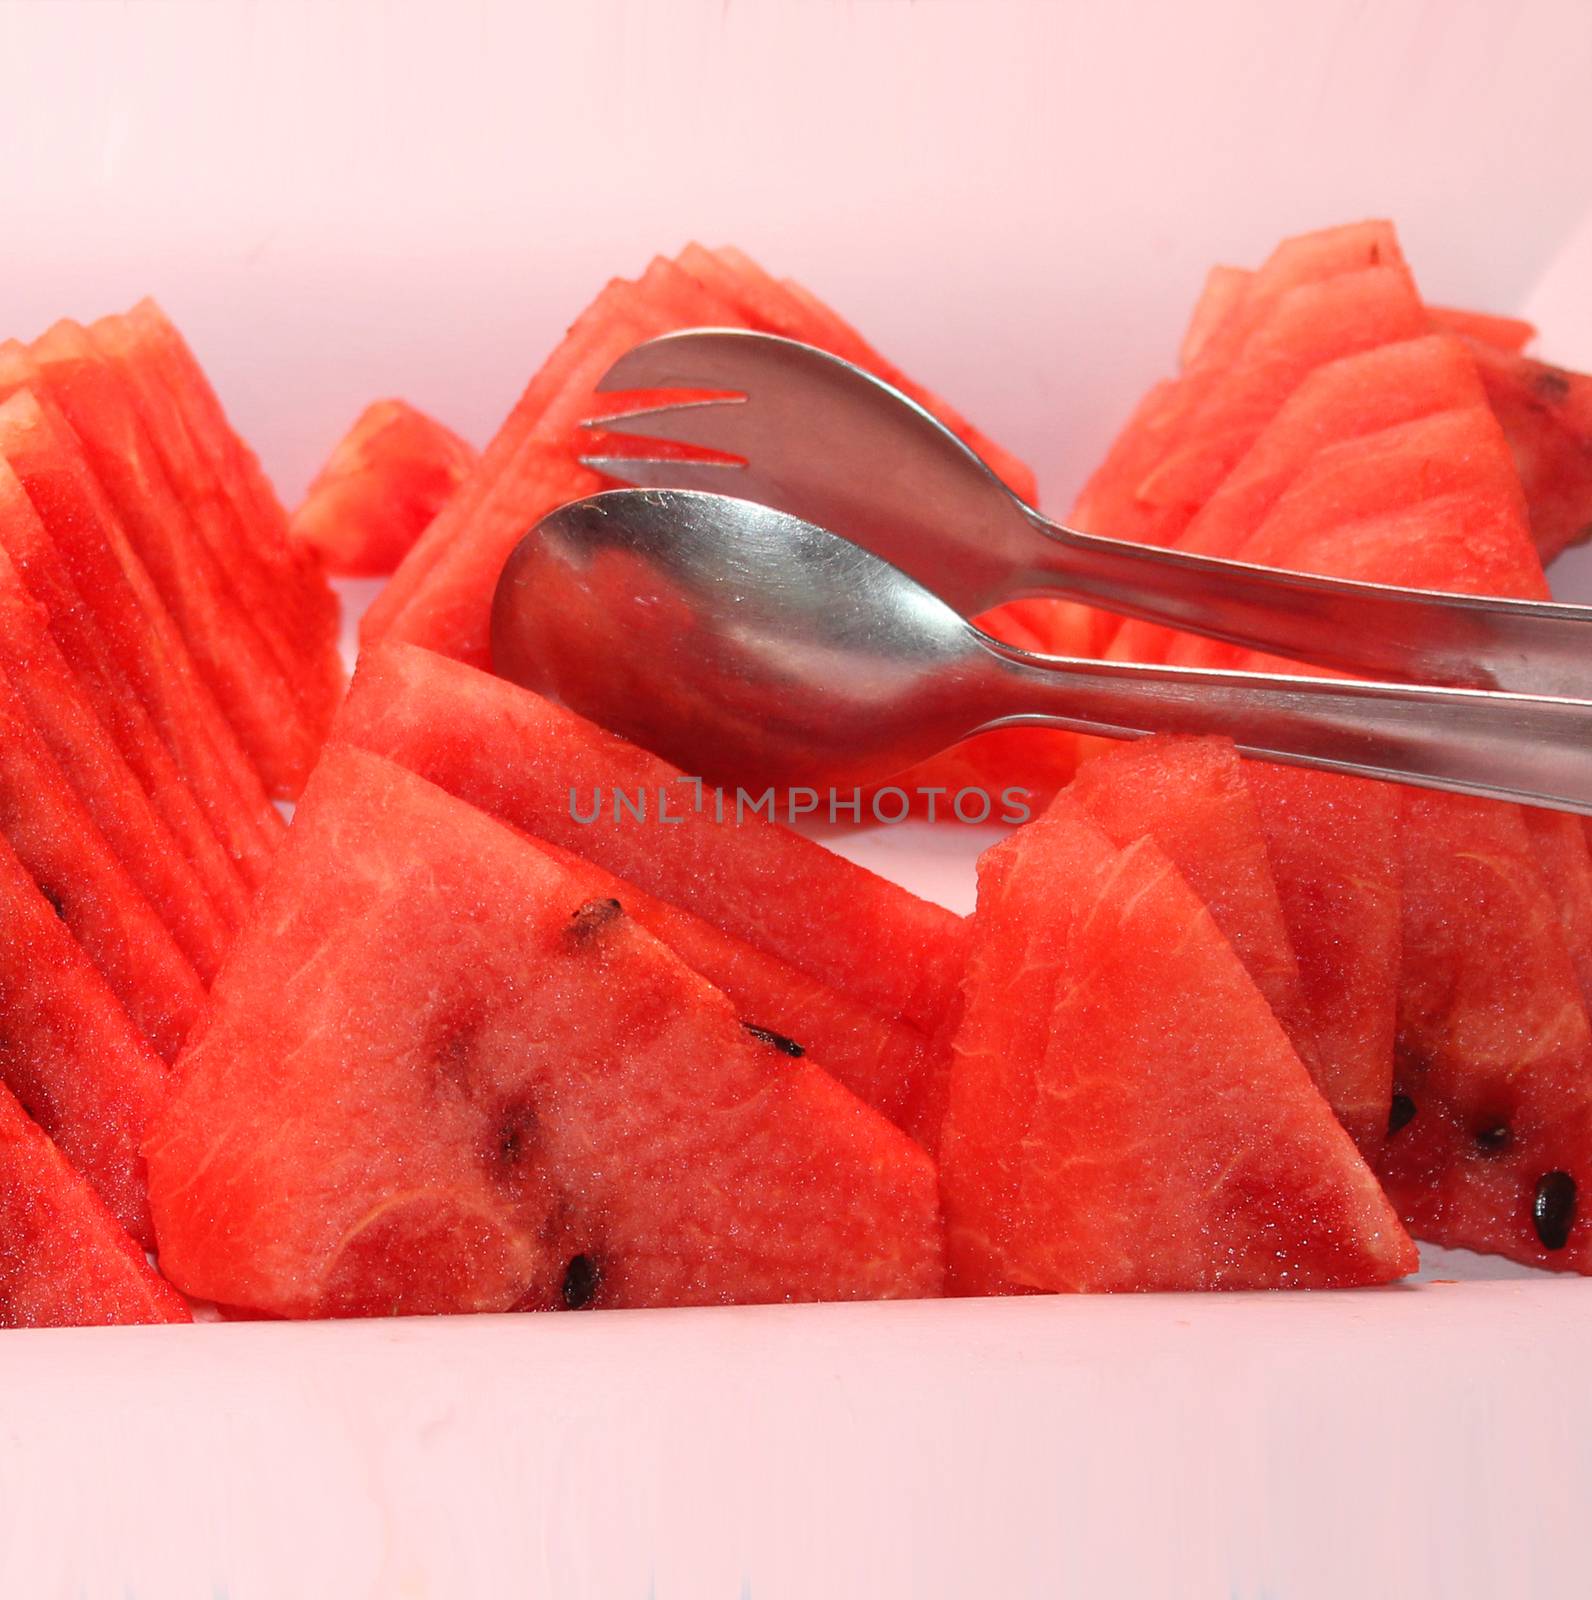 Pieces of watermelon